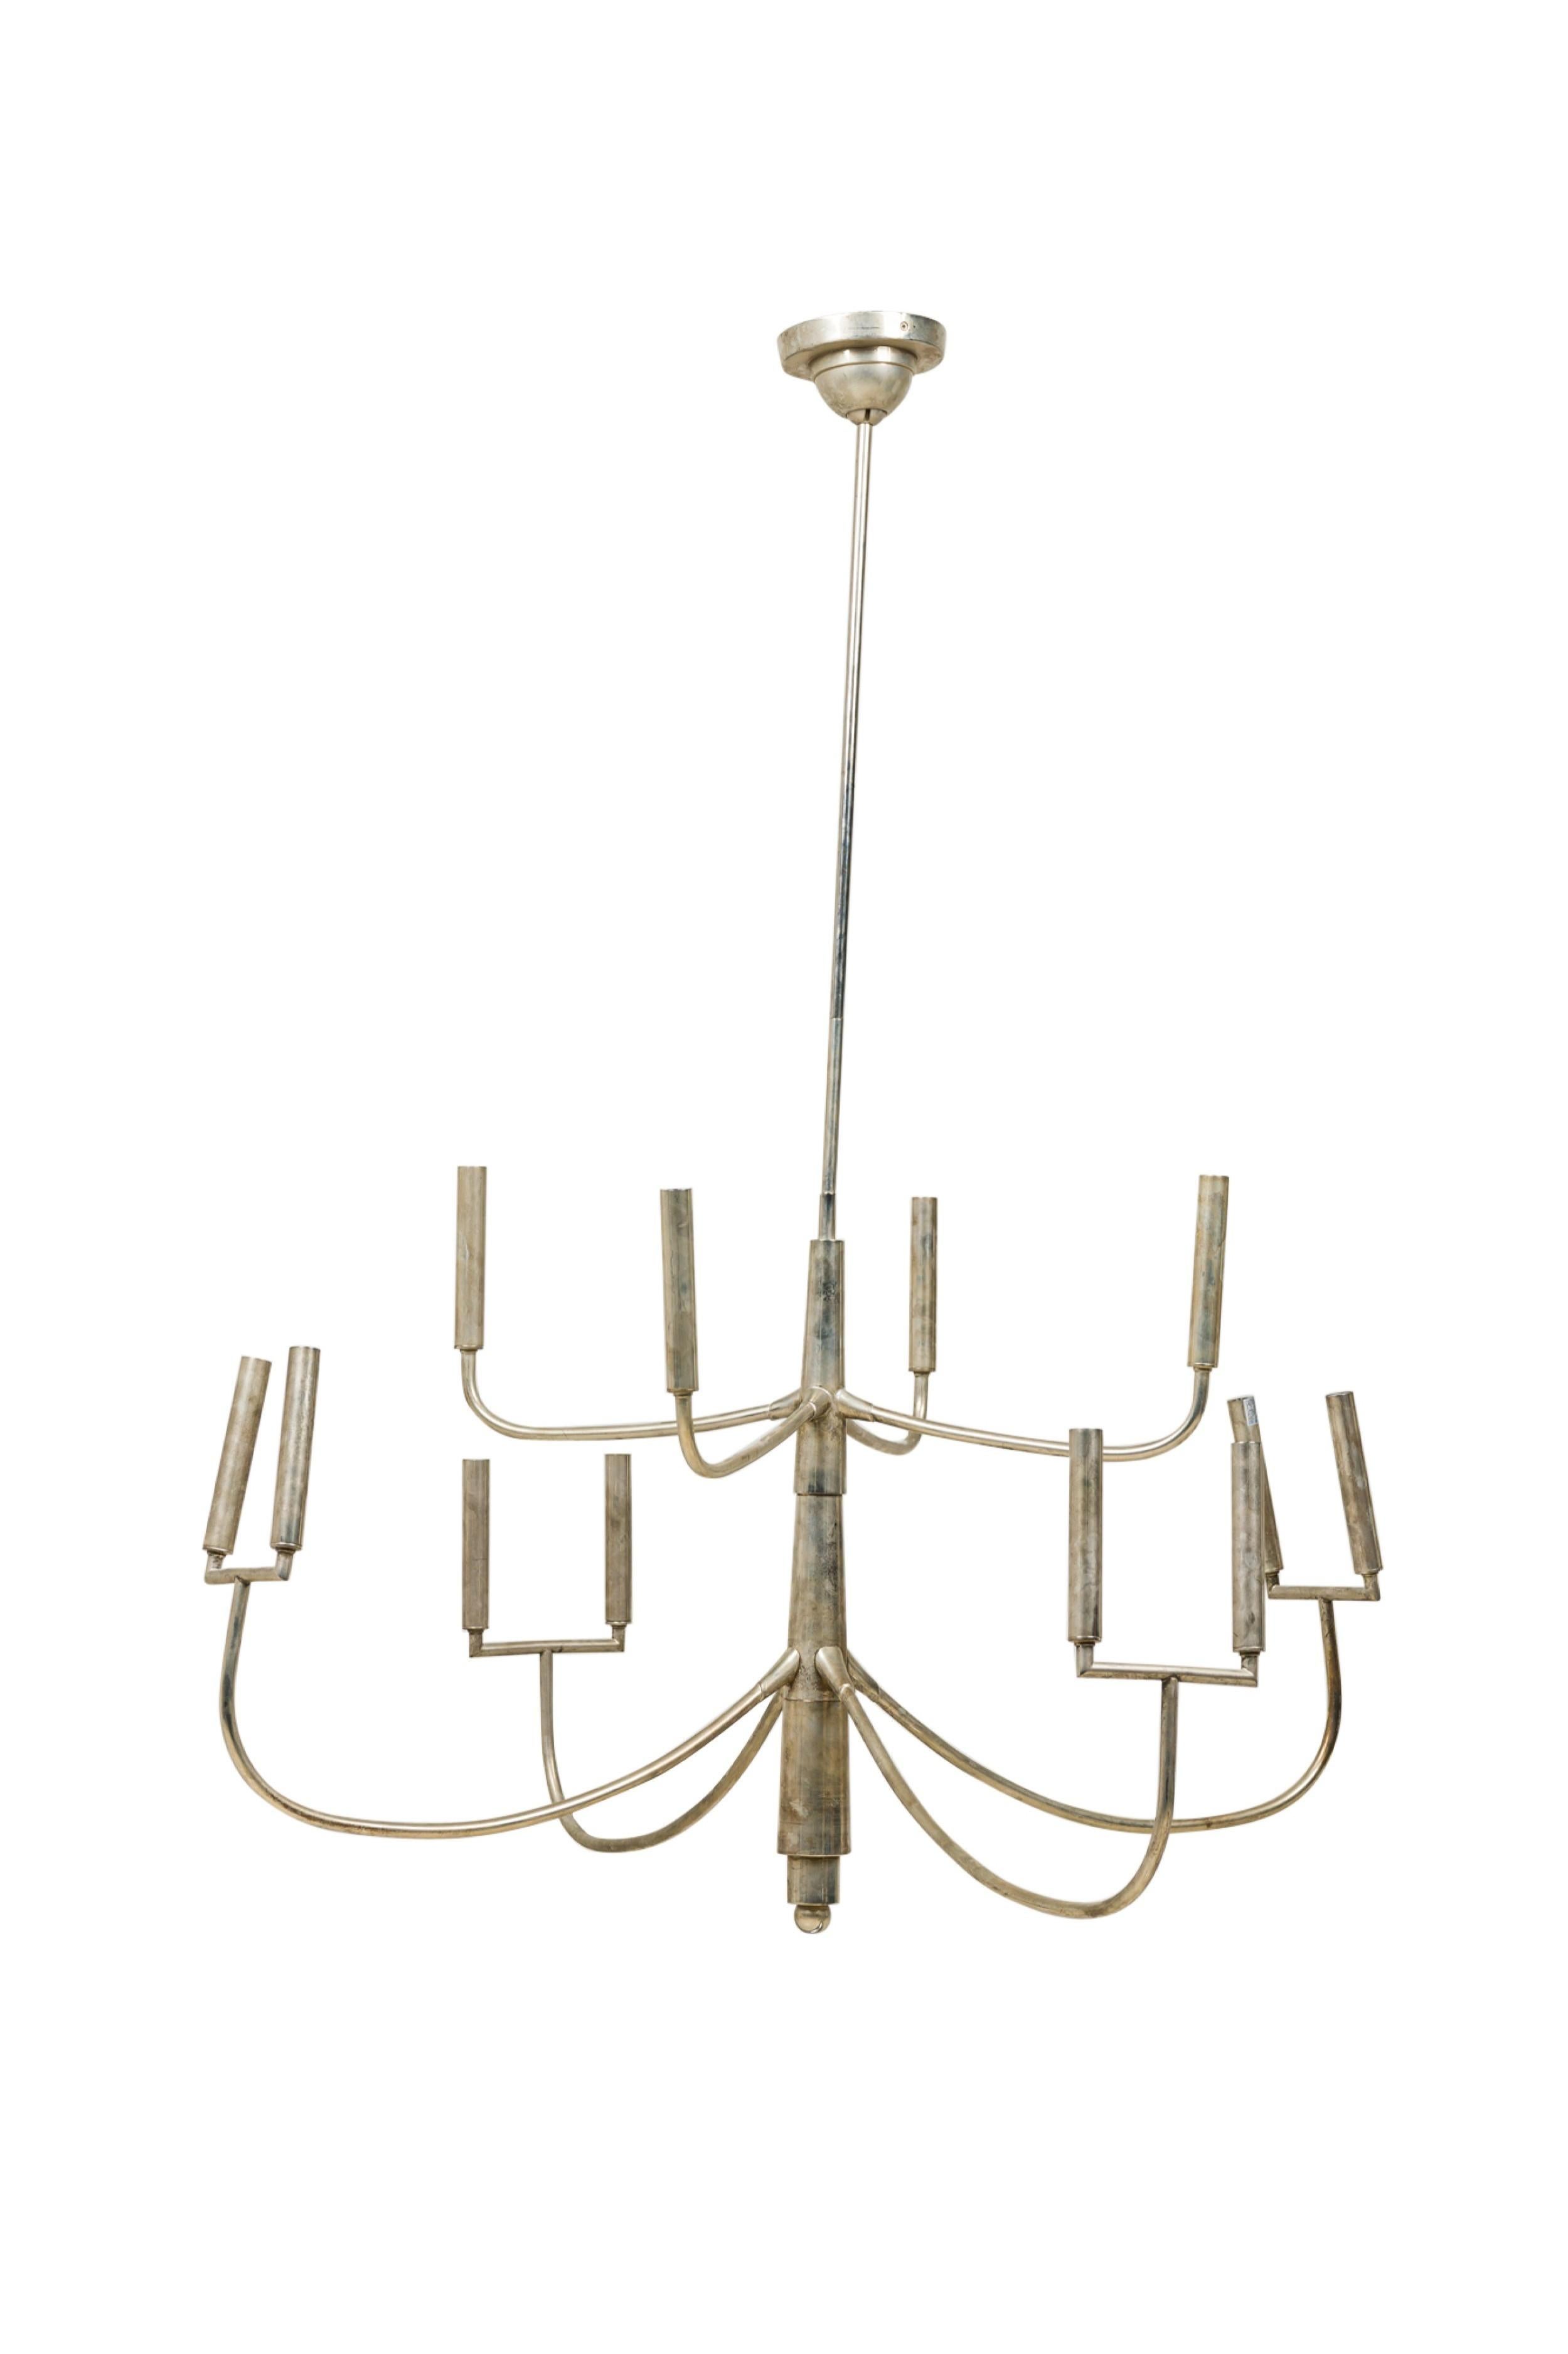 2 American Contemporary polished silver metal 2 tier chandelier with 4 double light lower arm and 4 single light upper tier arms (PRICED EACH) (Note: 1 identical in LIC warehouse)
 

 Condition: some tarnishing to finish